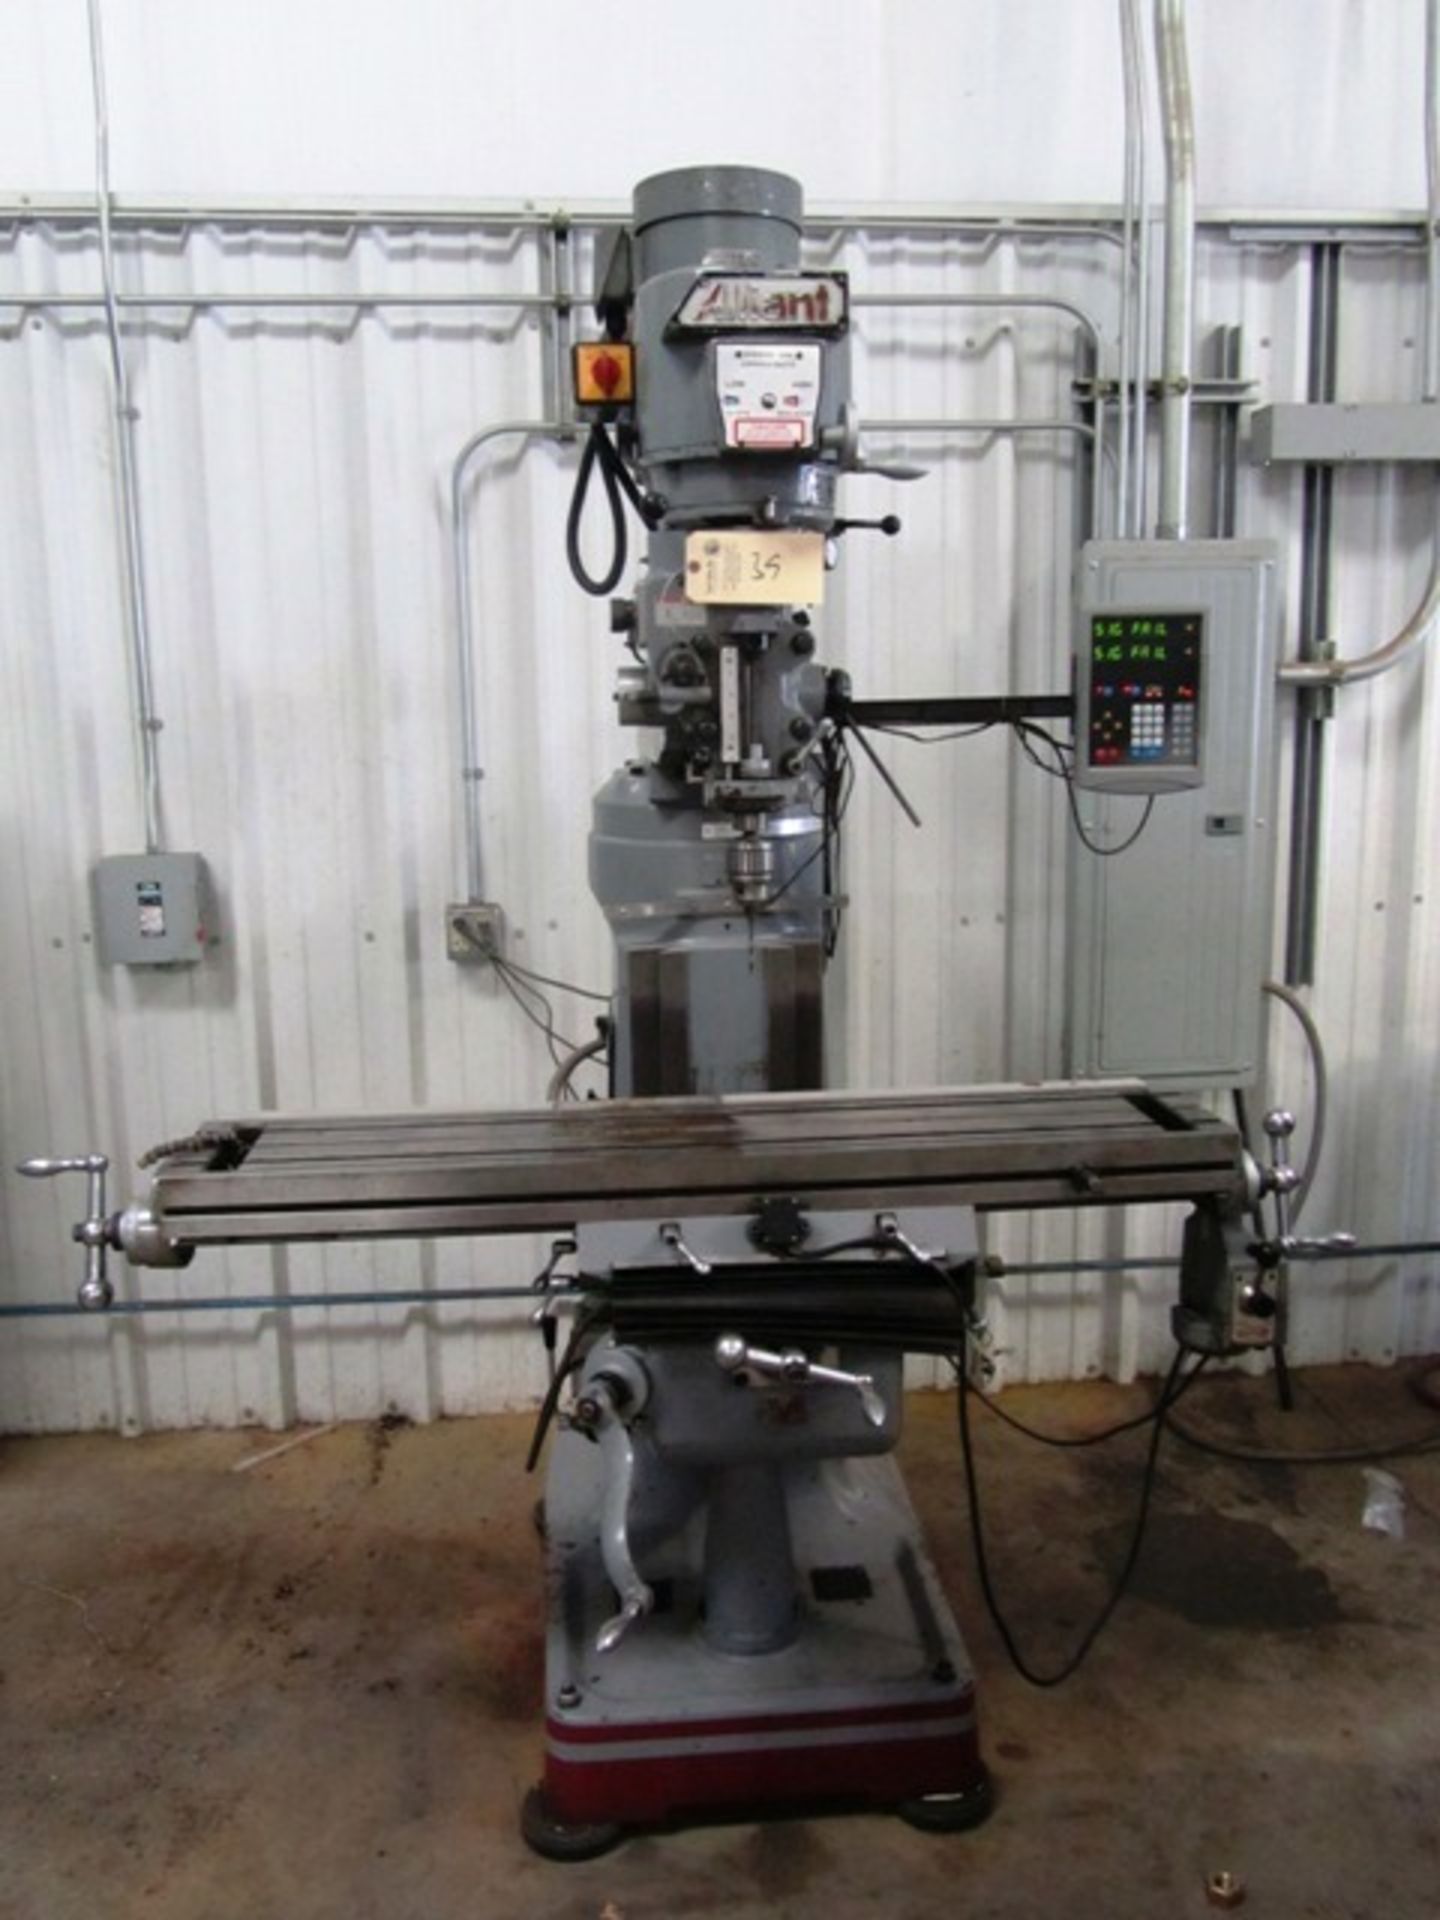 Alliant Model 949-3V Variable Speed Knee Mill with 9'' x 50'' Power Feed Table, R-8 Spindle Speeds